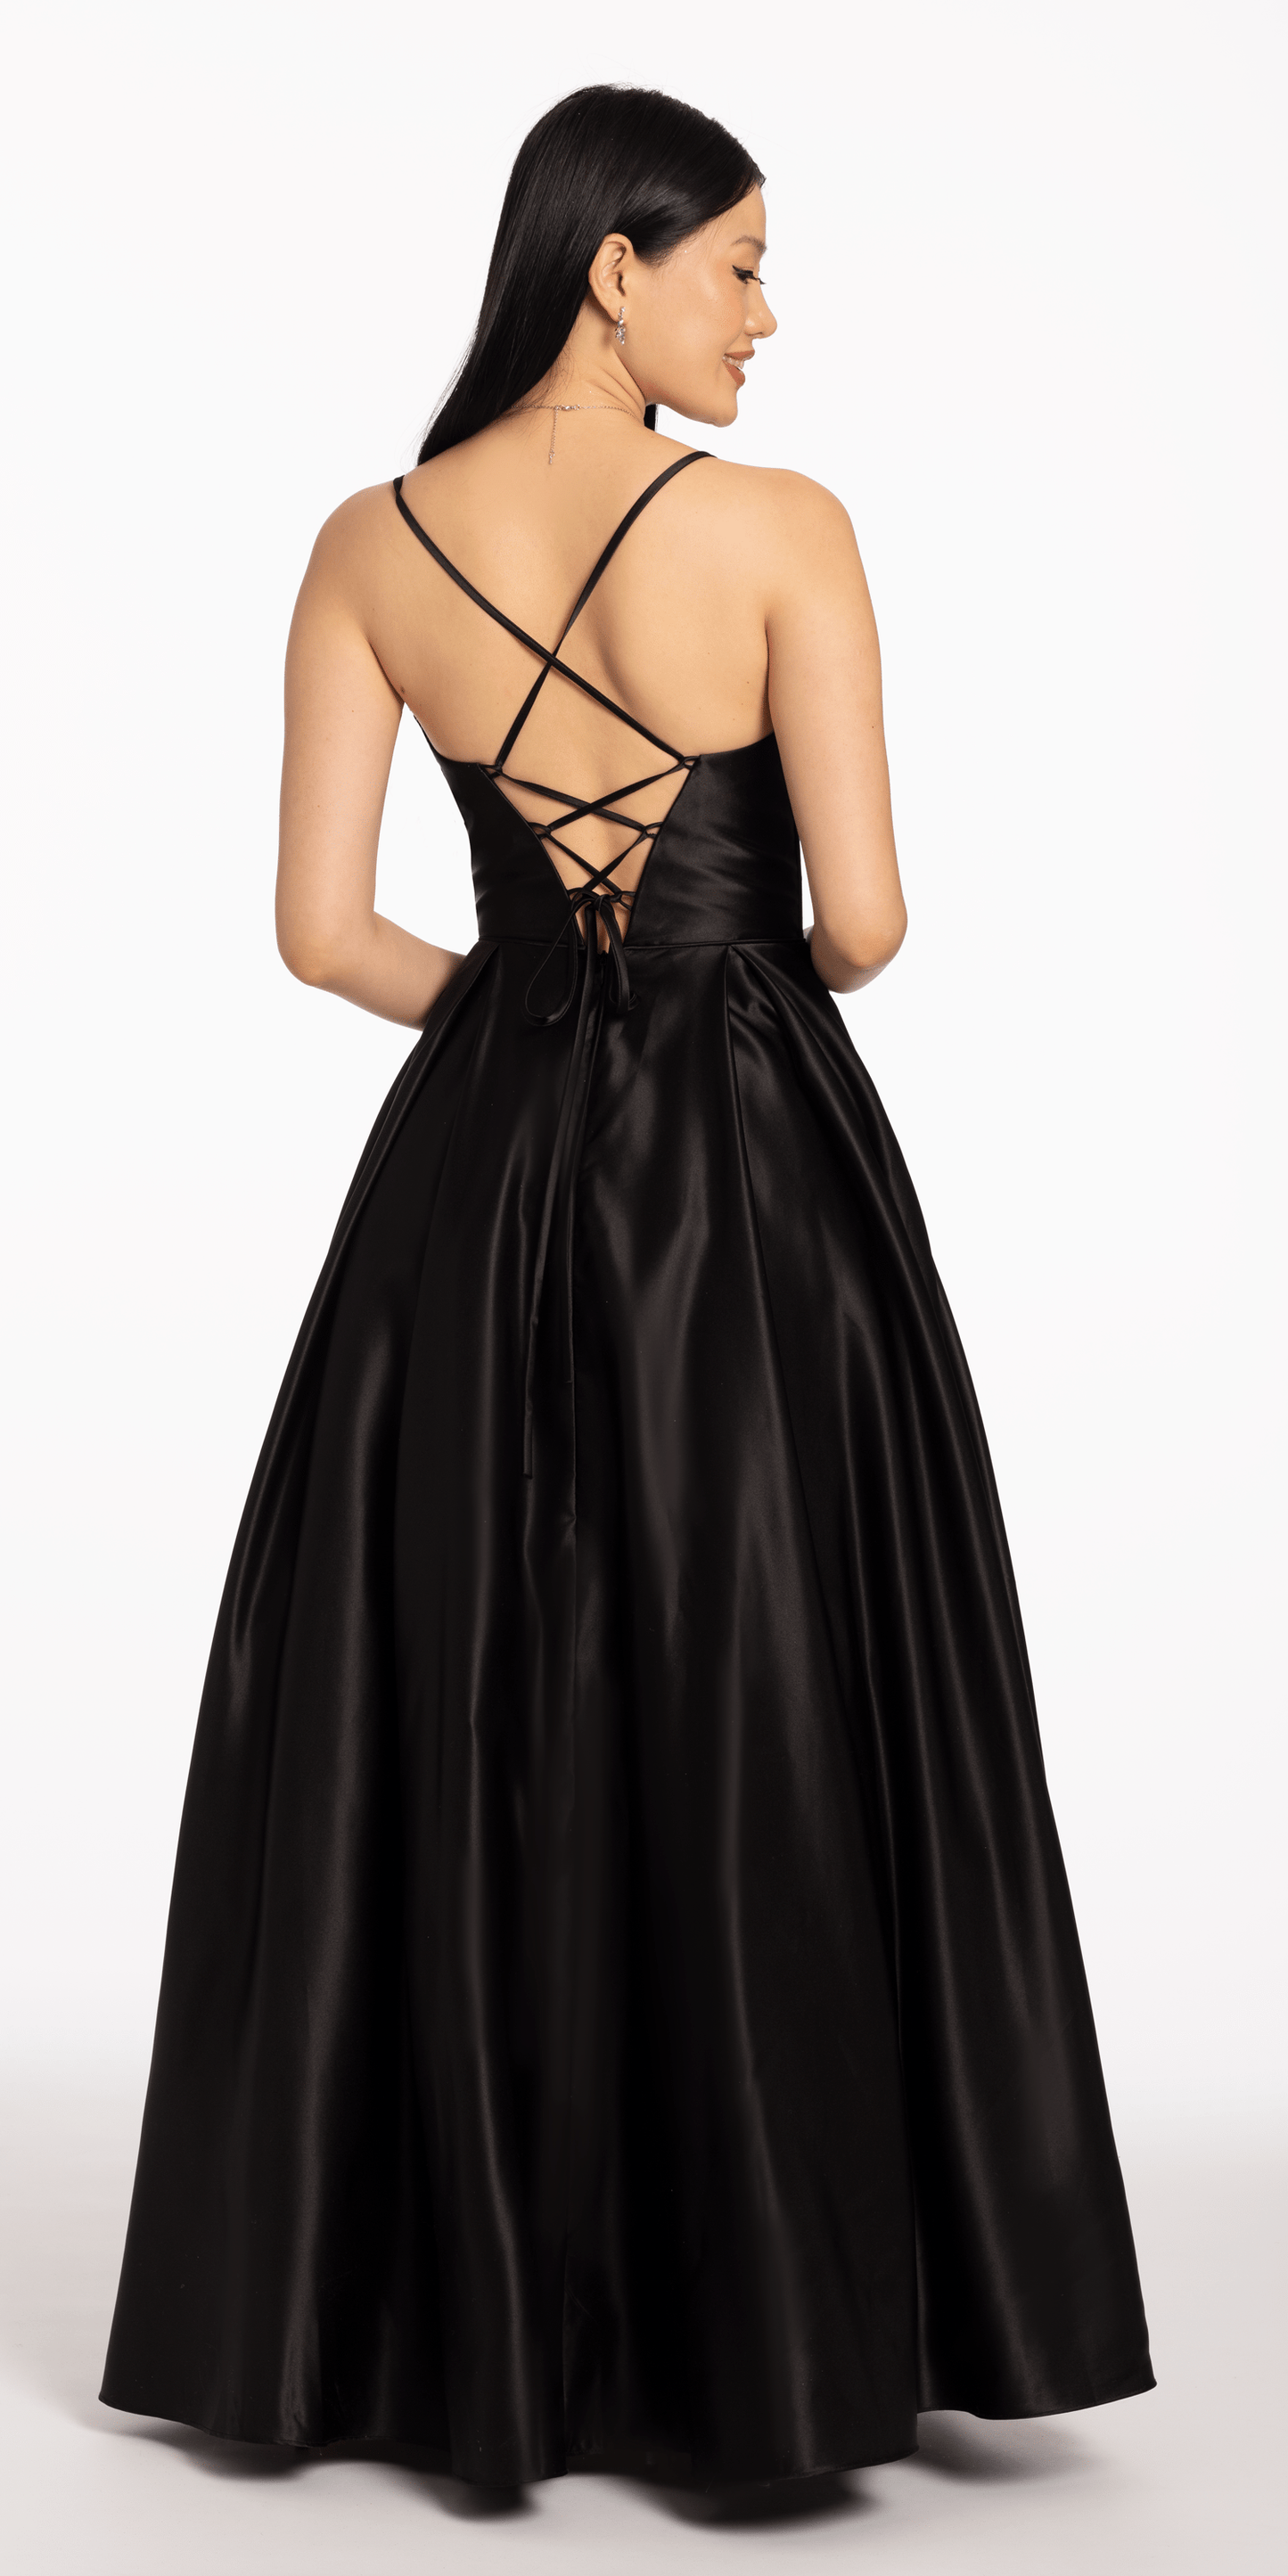 Camille La Vie Satin Pleated Sweetheart Lace Up Ballgown with Pockets